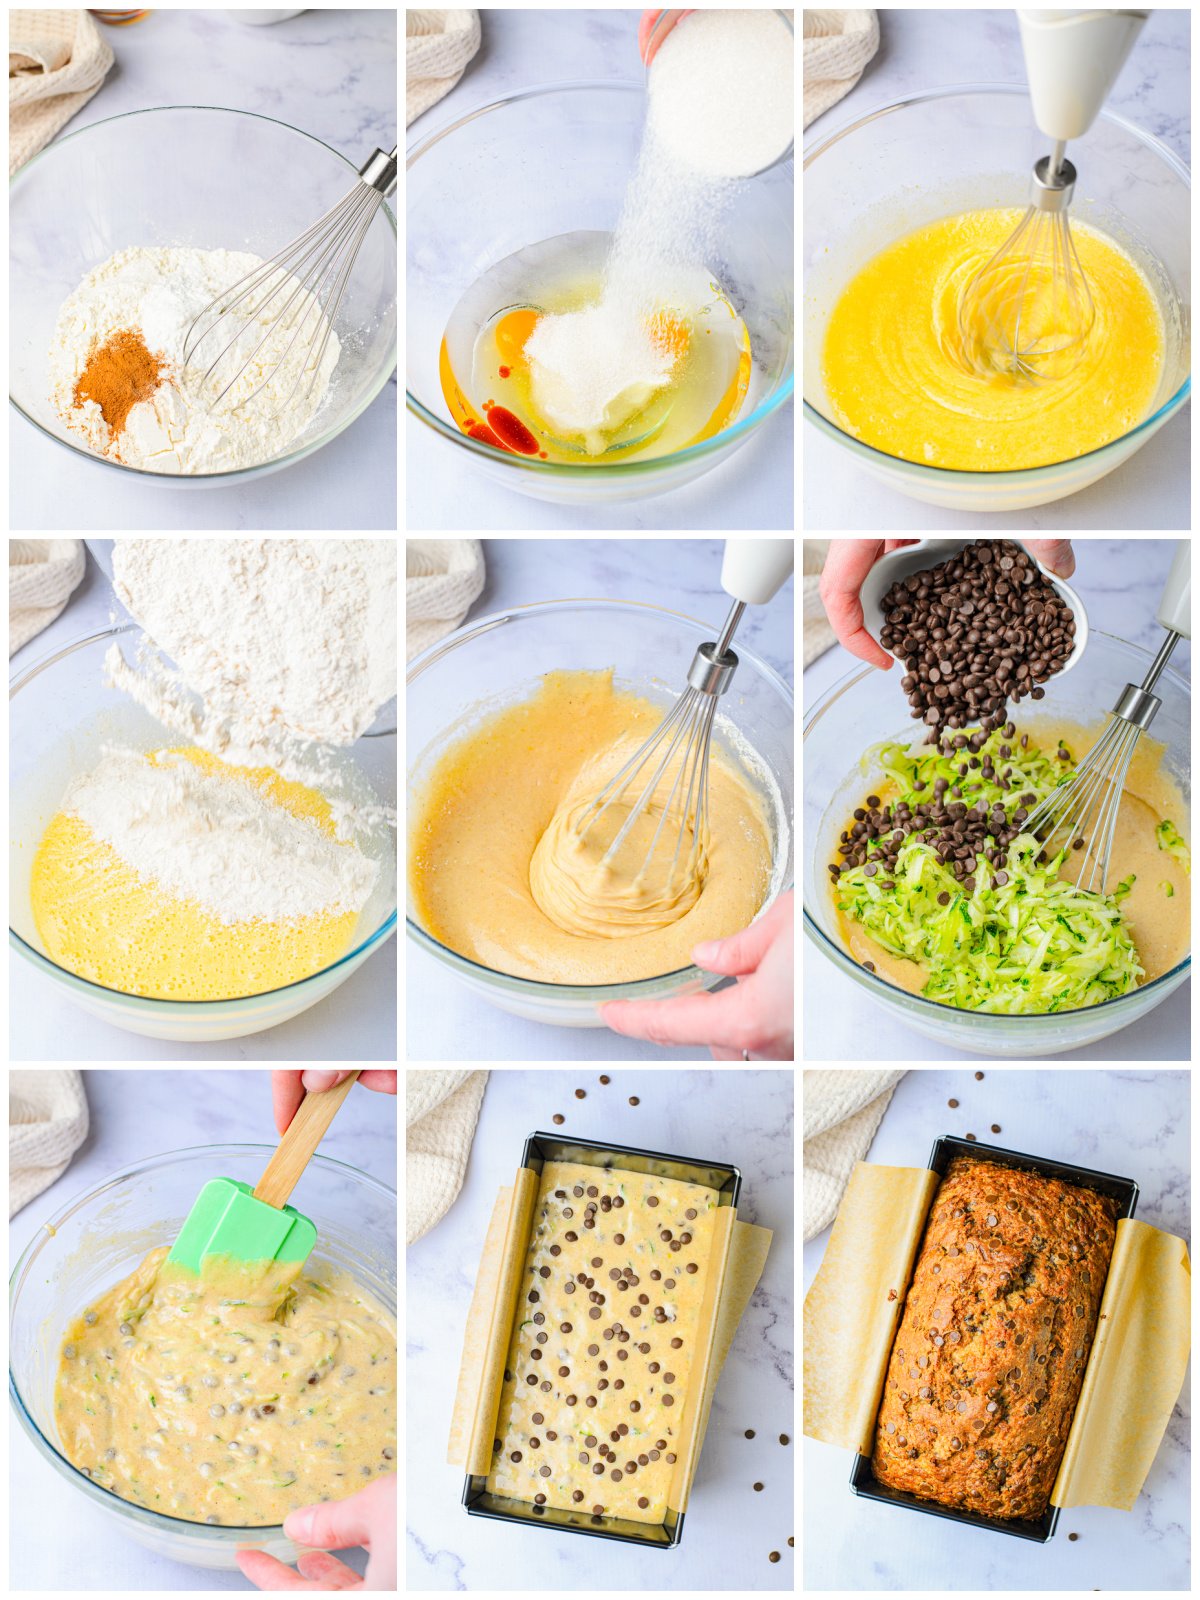 Step by step photos on how to make Chocolate Chip Zucchini Bread